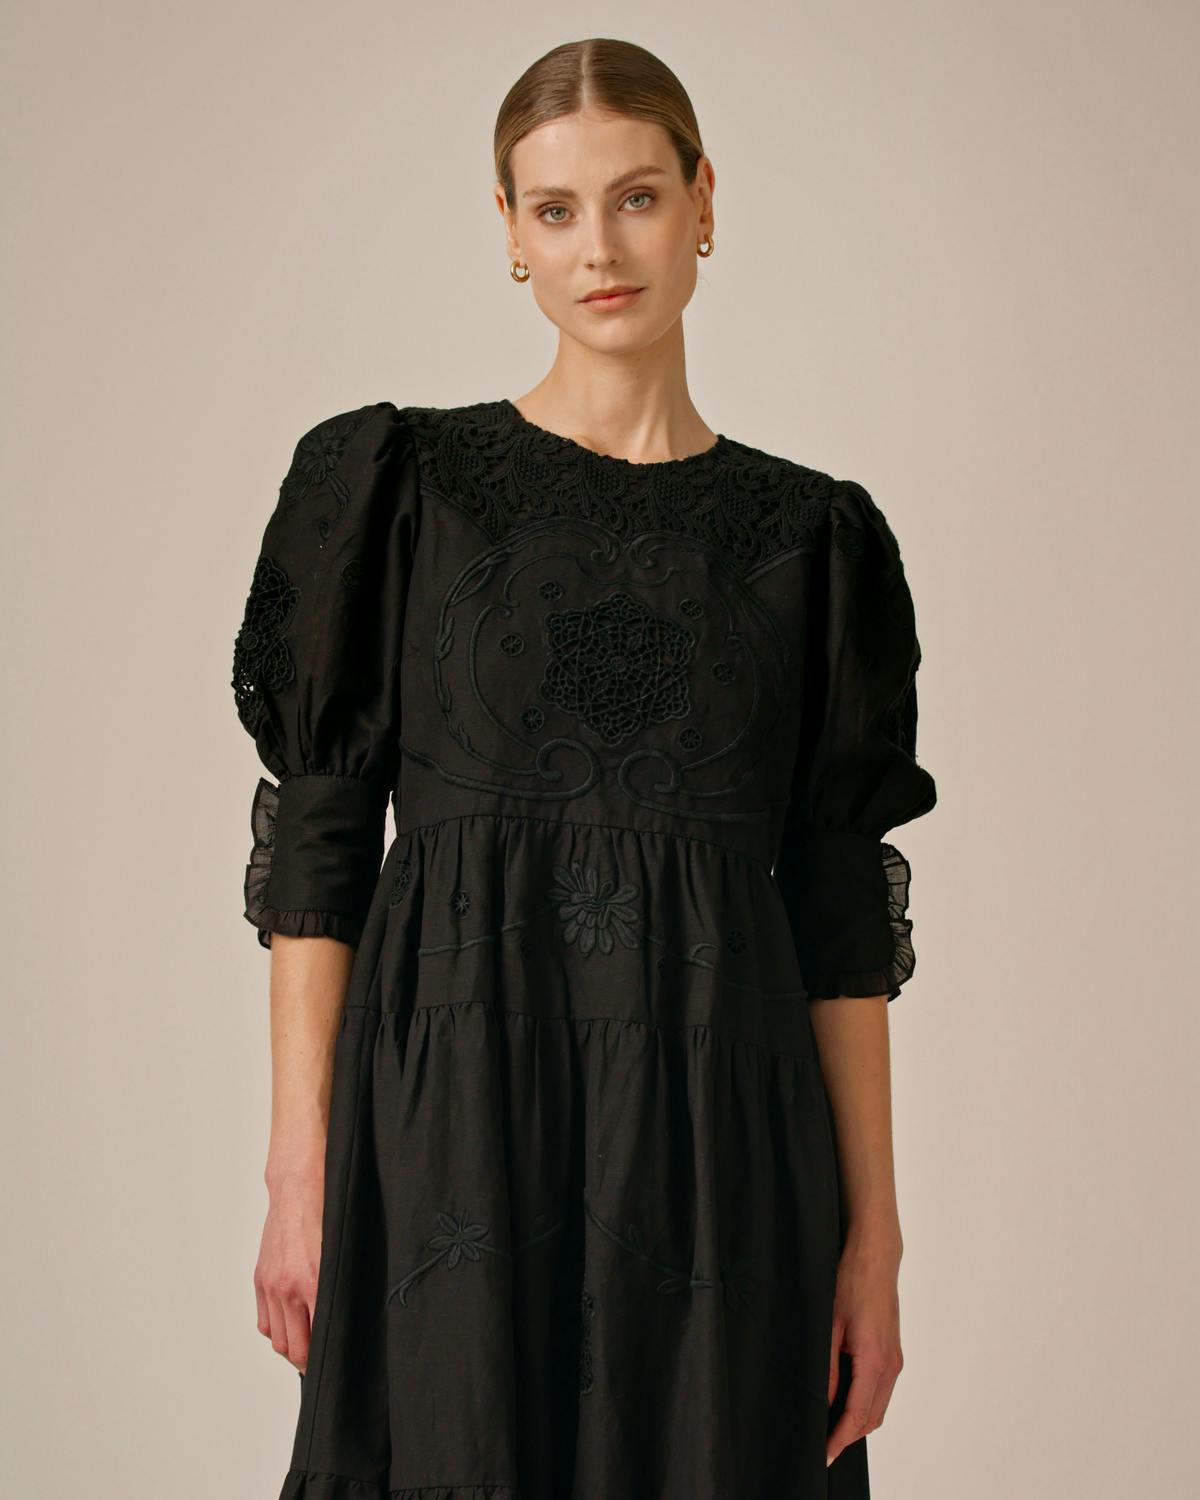 Linen Embroidery Gown, Black. Image #2